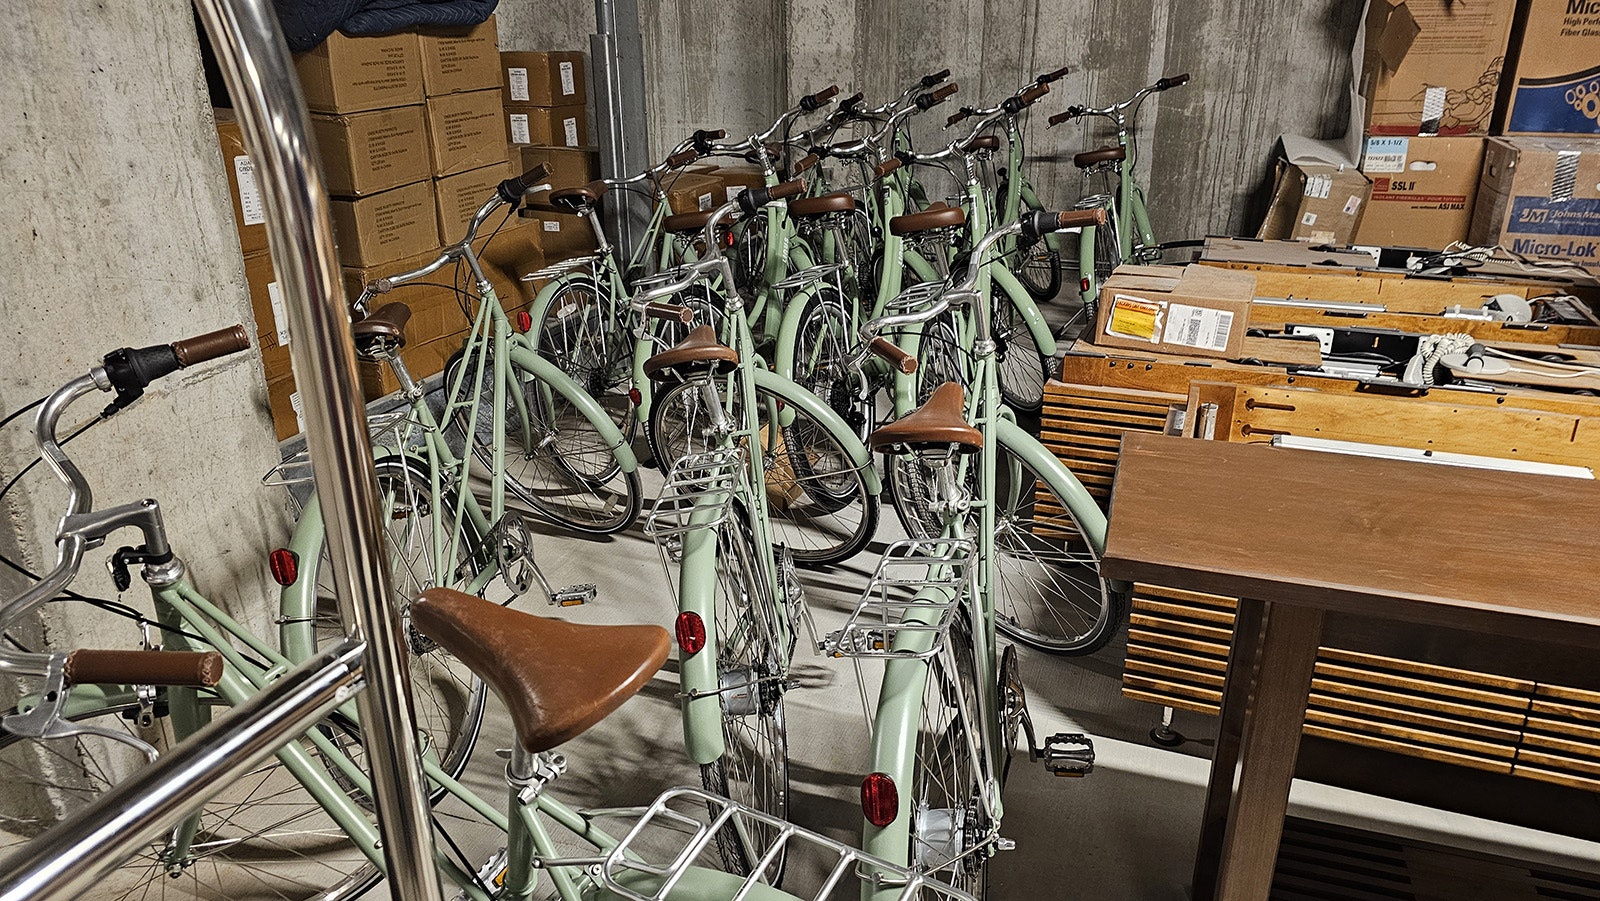 Six more bikes have been added to the fleet, and the new ones were painted in green to match the old ones.